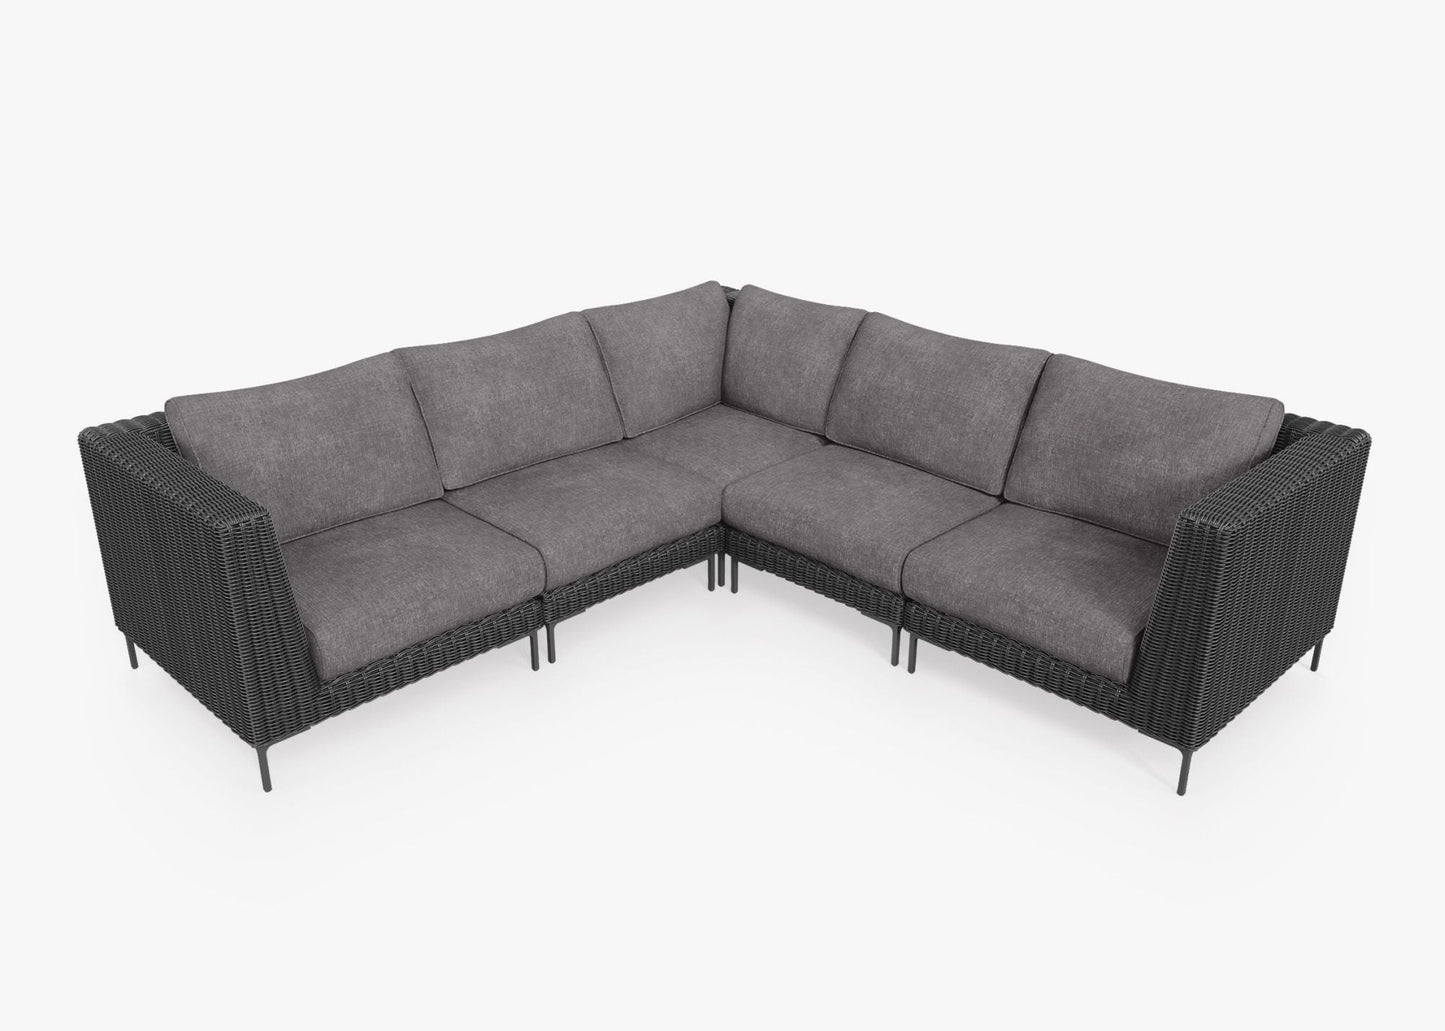 Live Outer 103" x 103" Black Wicker Outdoor Corner Sectional 5-Seat With Dark Pebble Gray Cushion